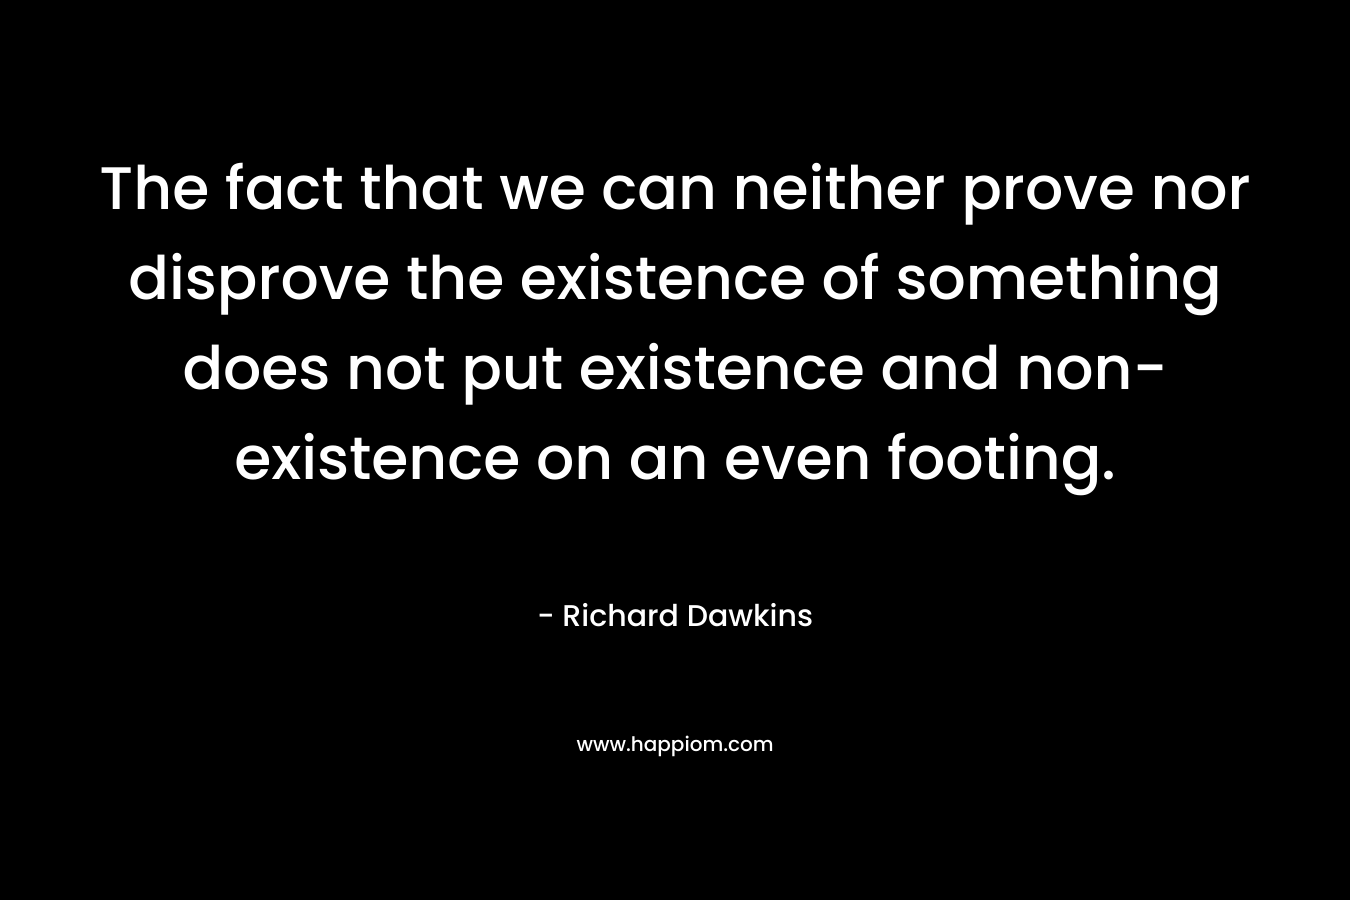 The fact that we can neither prove nor disprove the existence of something does not put existence and non-existence on an even footing.